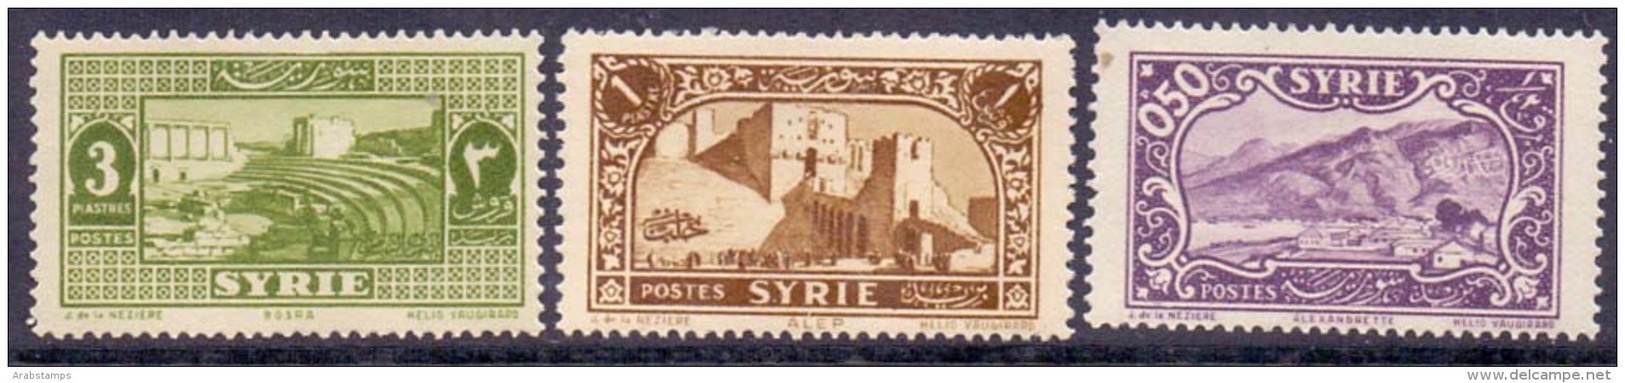 1930 Syria Second Views 3 Values  MNH (Or Best Offer) - Syria